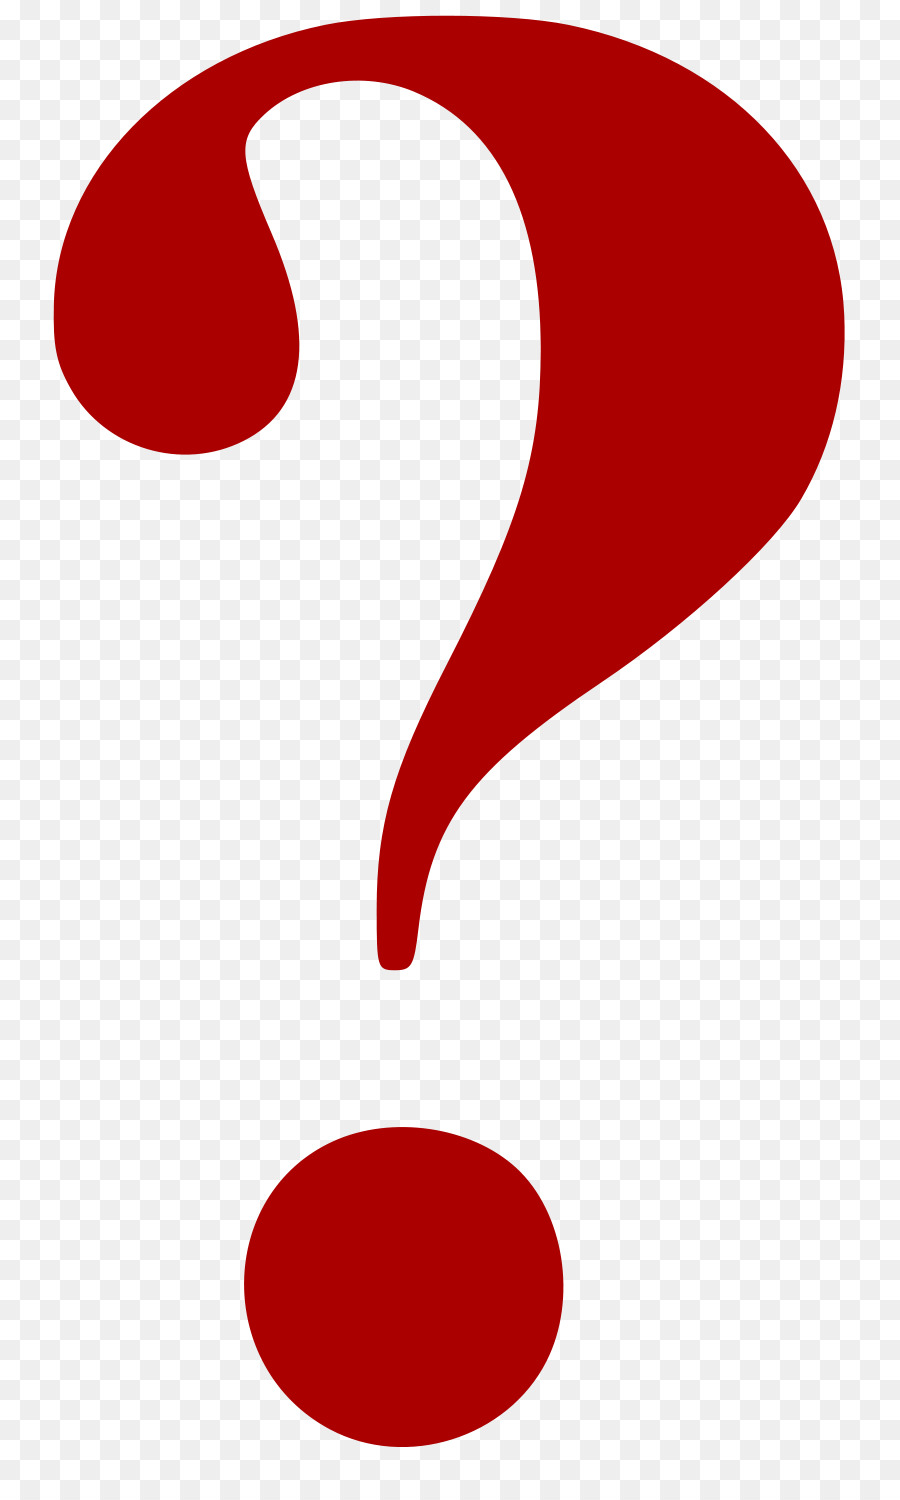 Question mark Computer Icons Clip art - question png download - 888*1484 - Free Transparent Question Mark png Download.